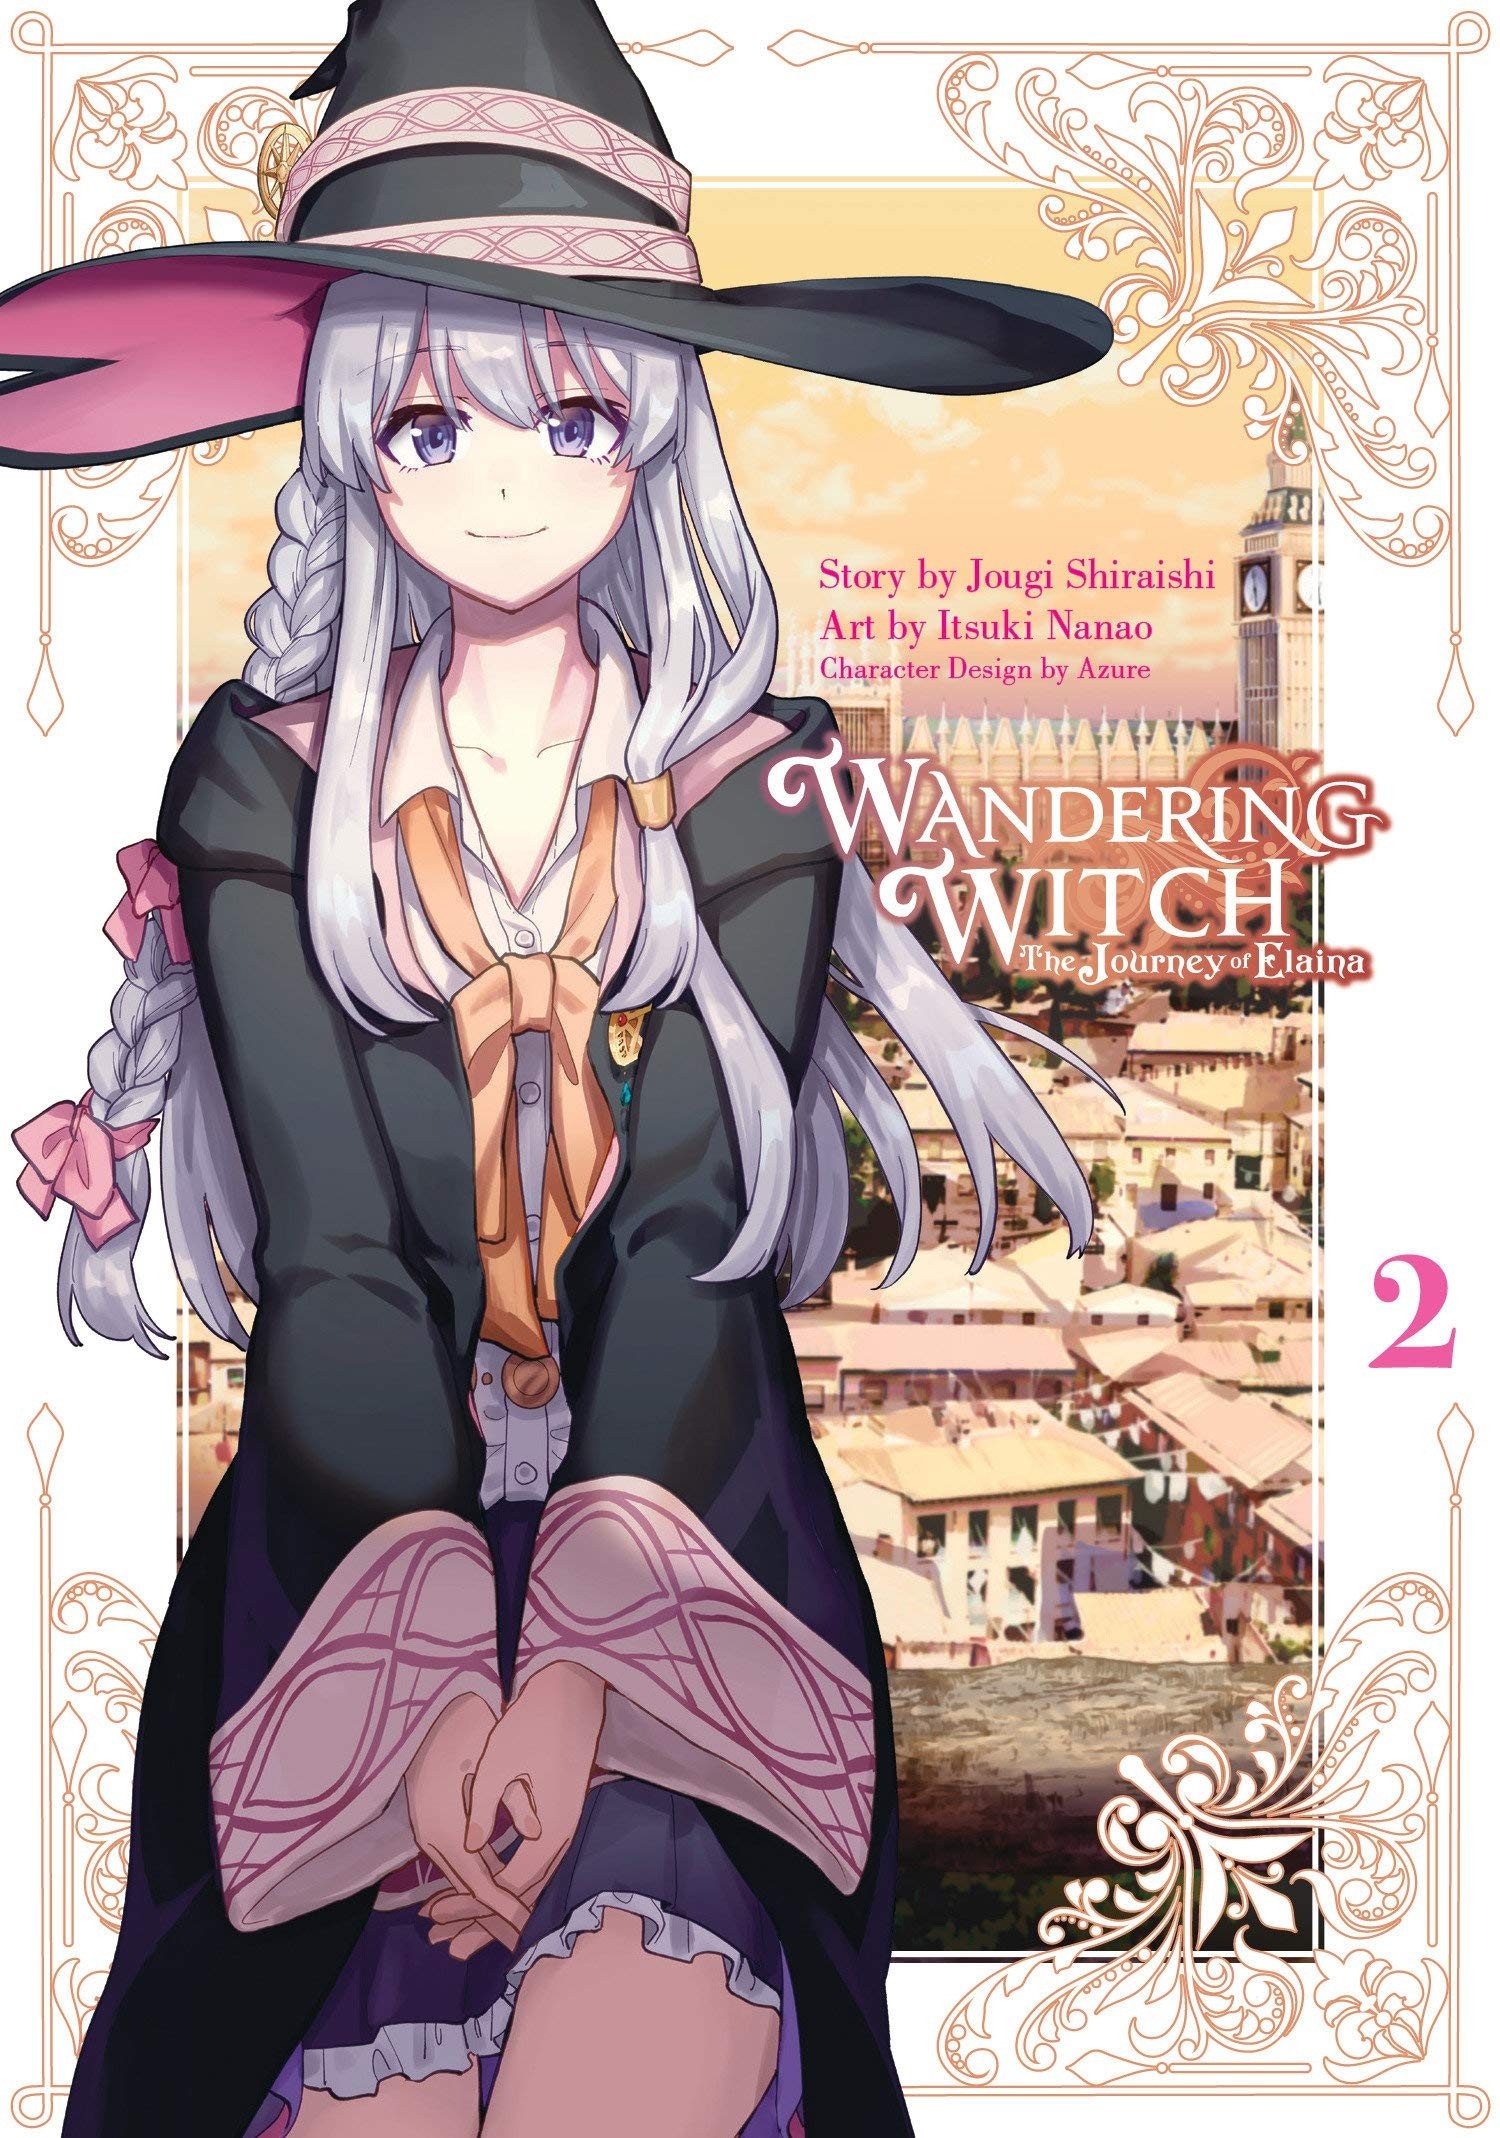 Wandering Witch: The Journey of Elaina, Vol. 02